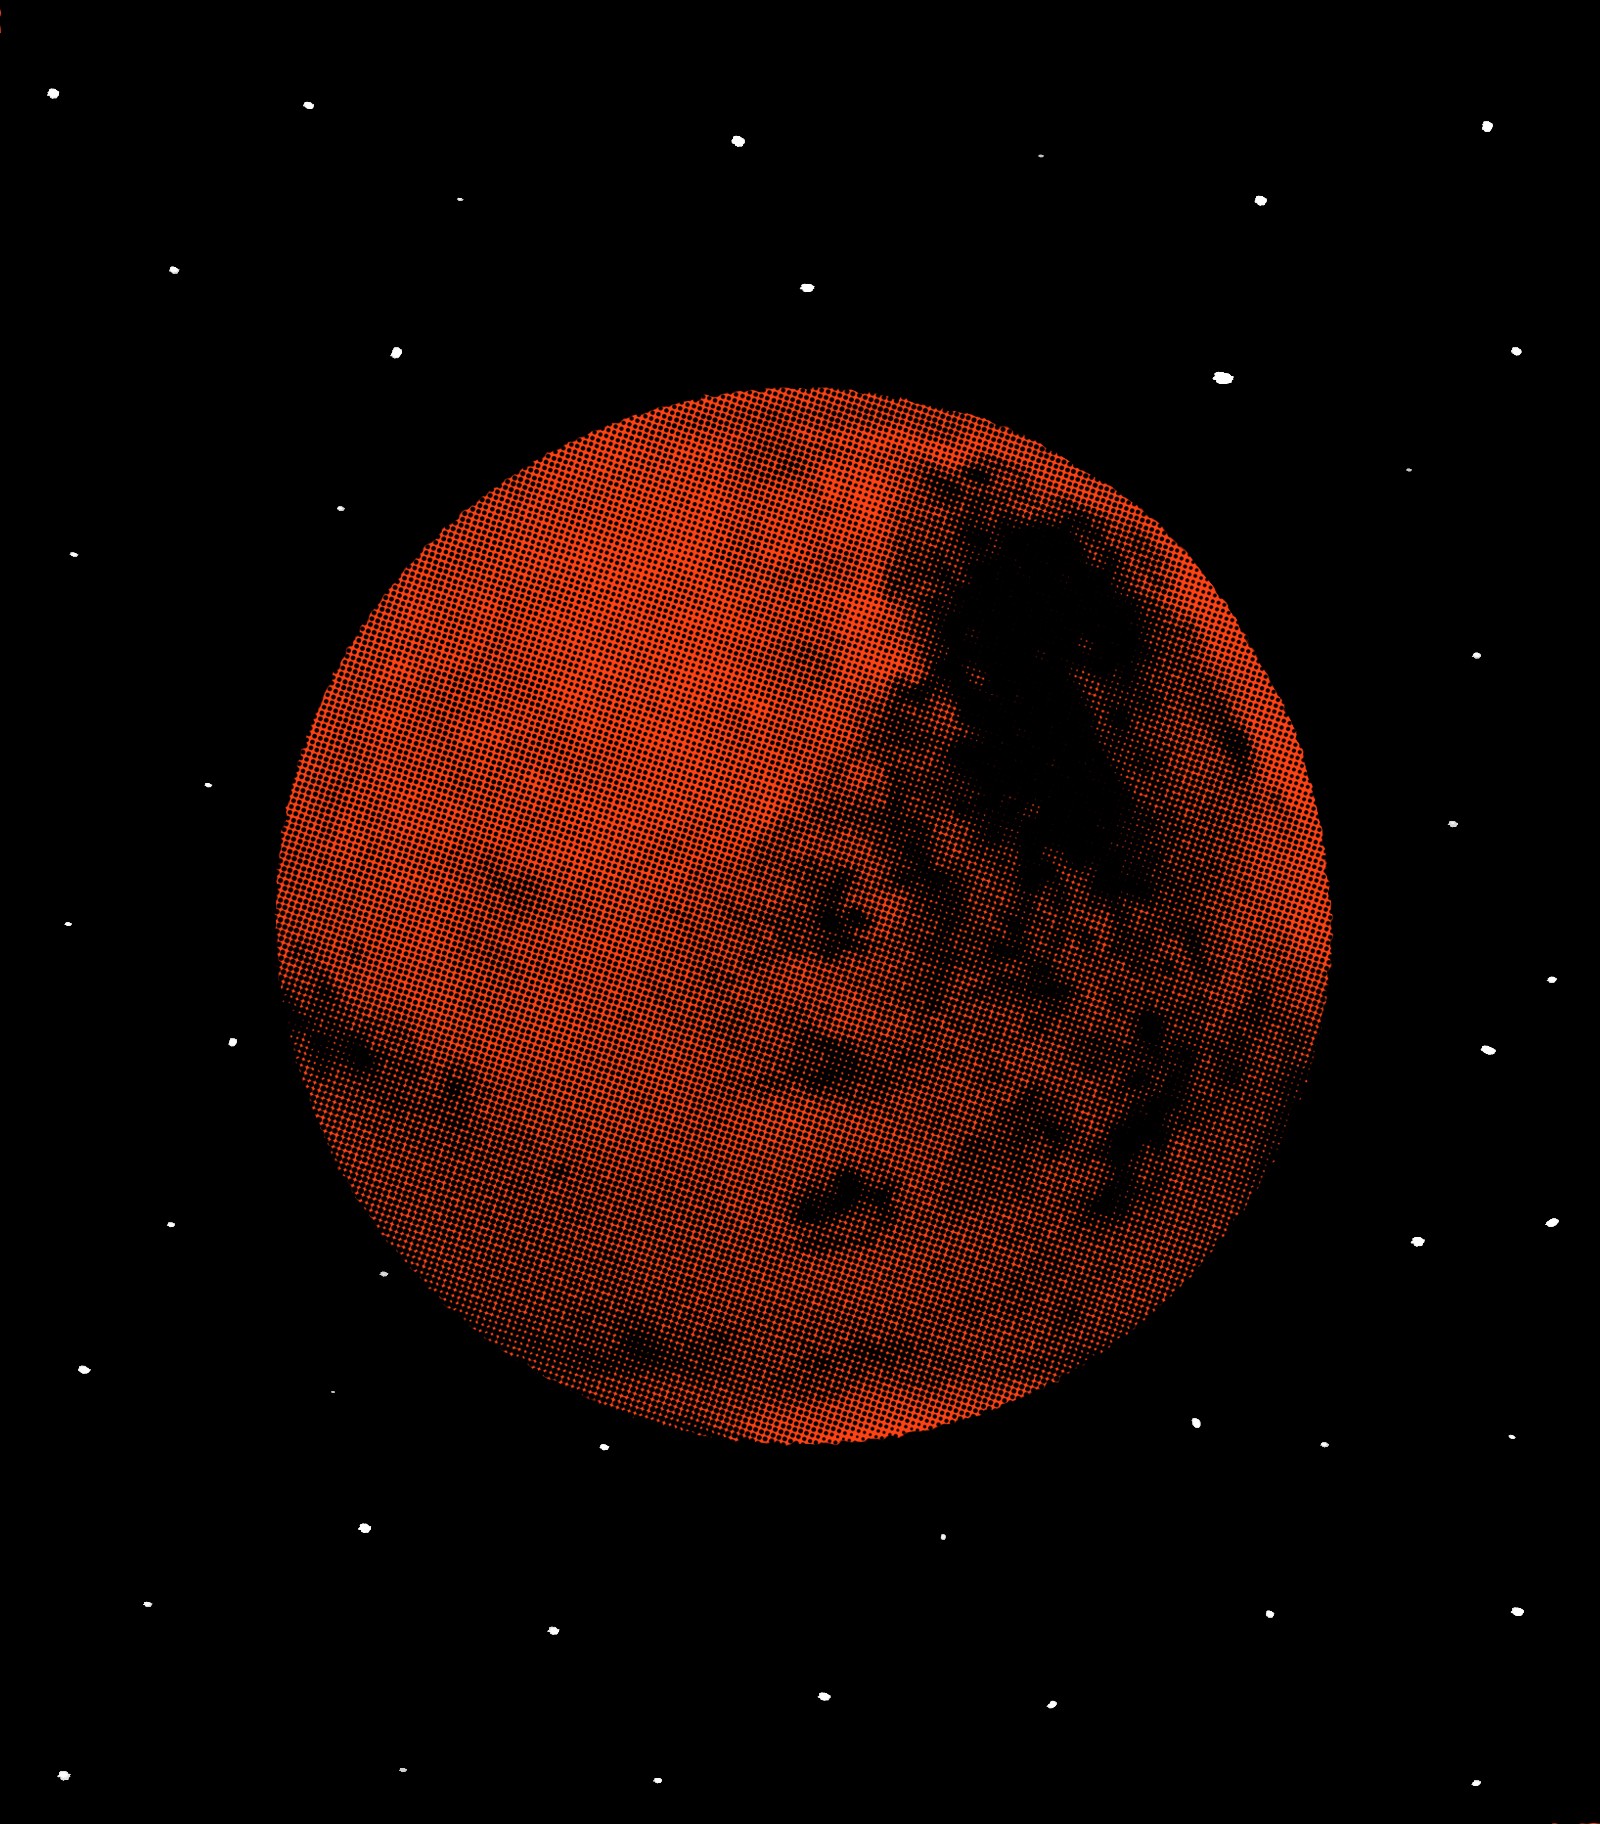 All dressed up for. Astronomy clipart mission to mars